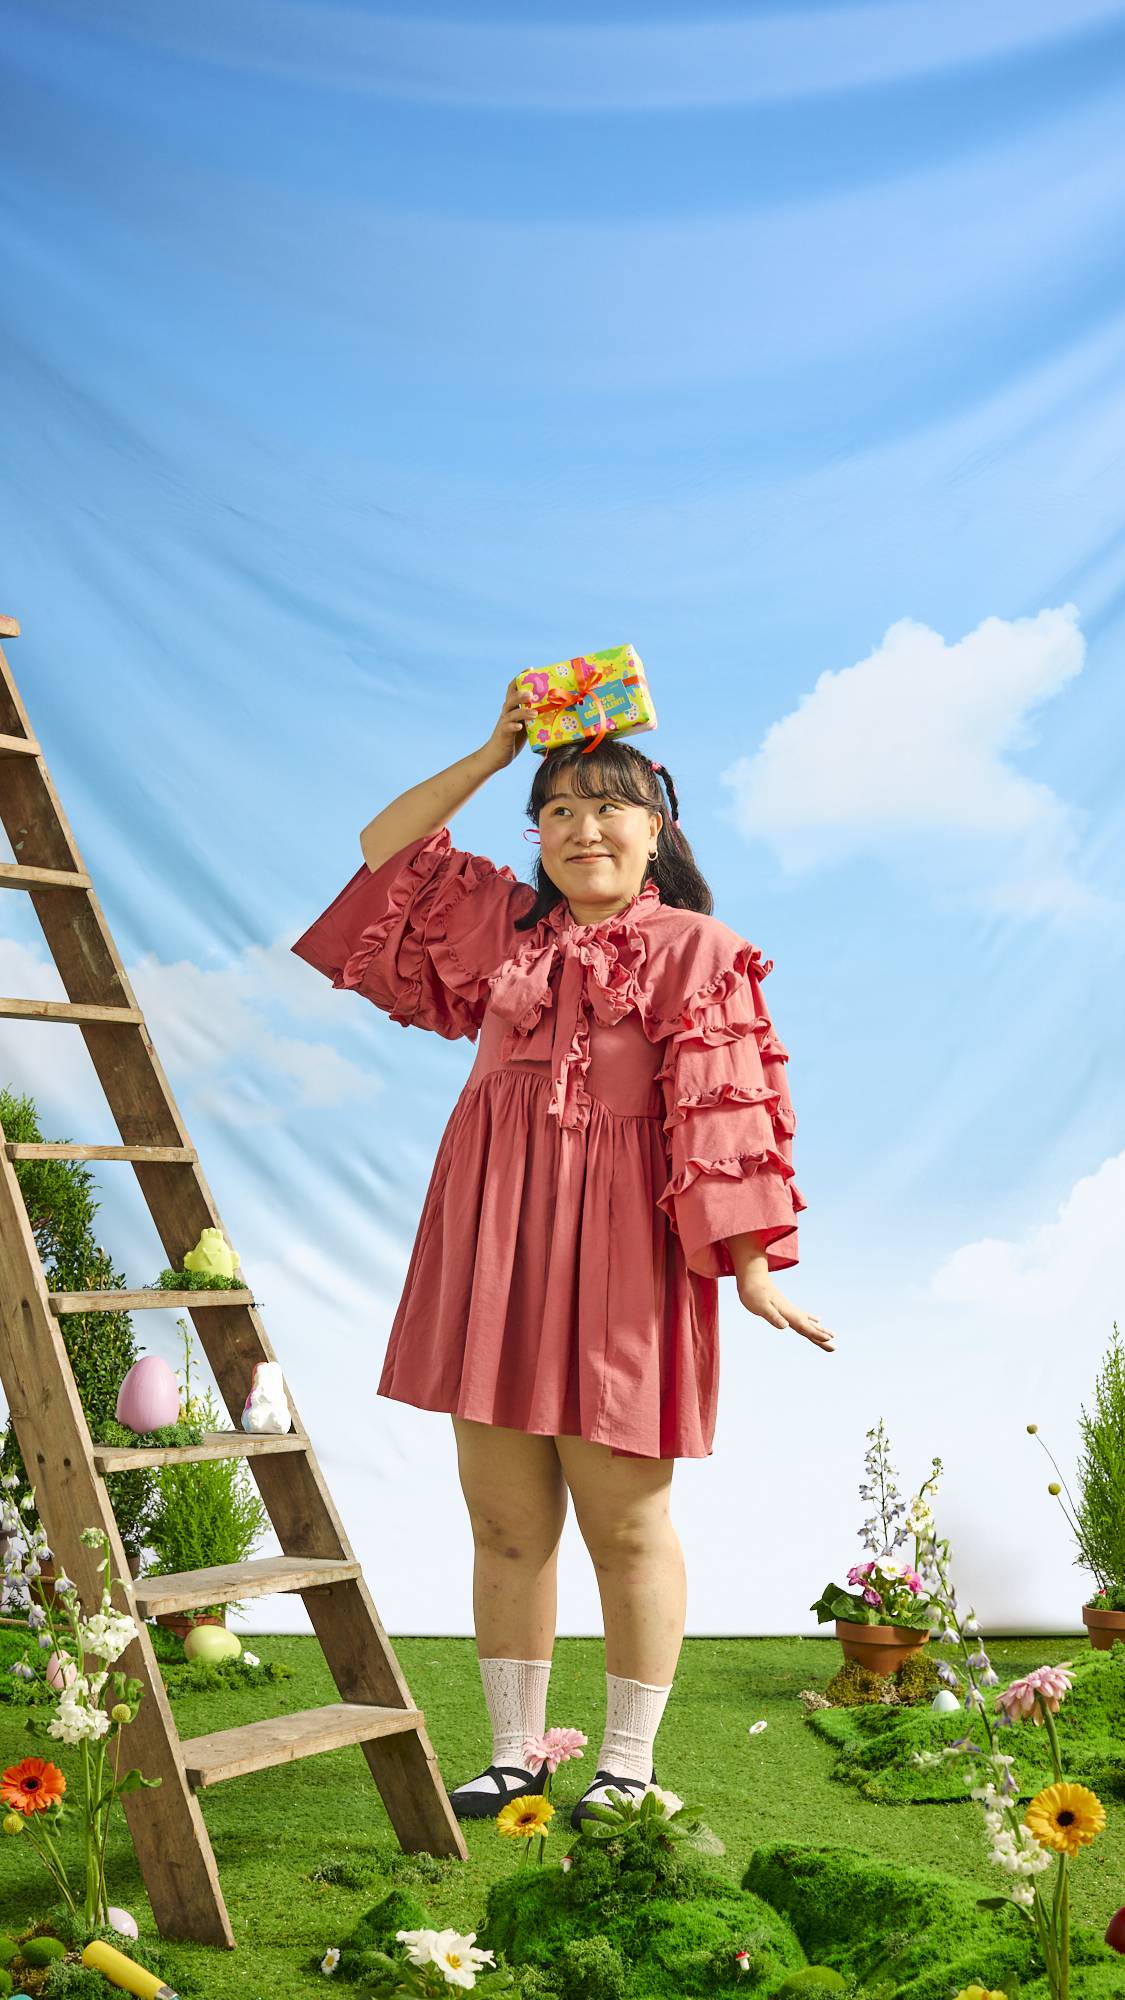 The model is standing in a ruffled coral dress under blue skies, surrounded by grass and flowers, holding the gift box on top of their head. 